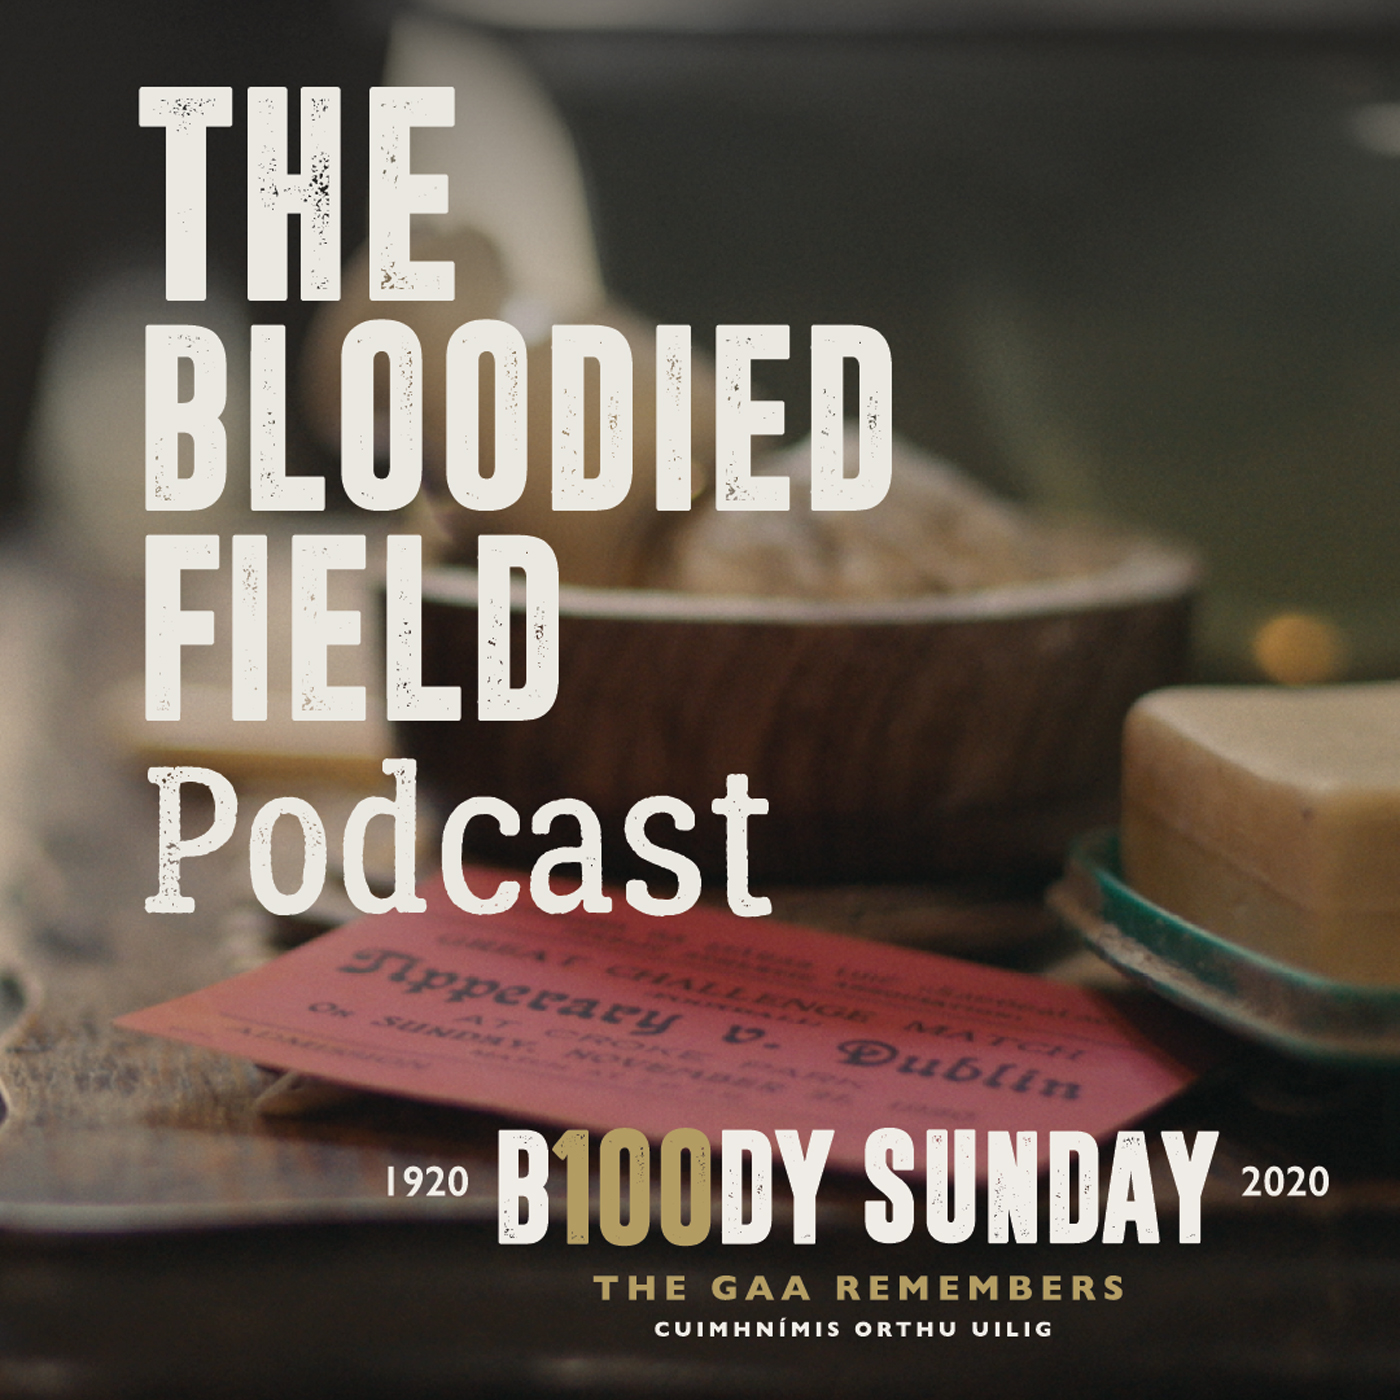 The Bloodied Field Podcast